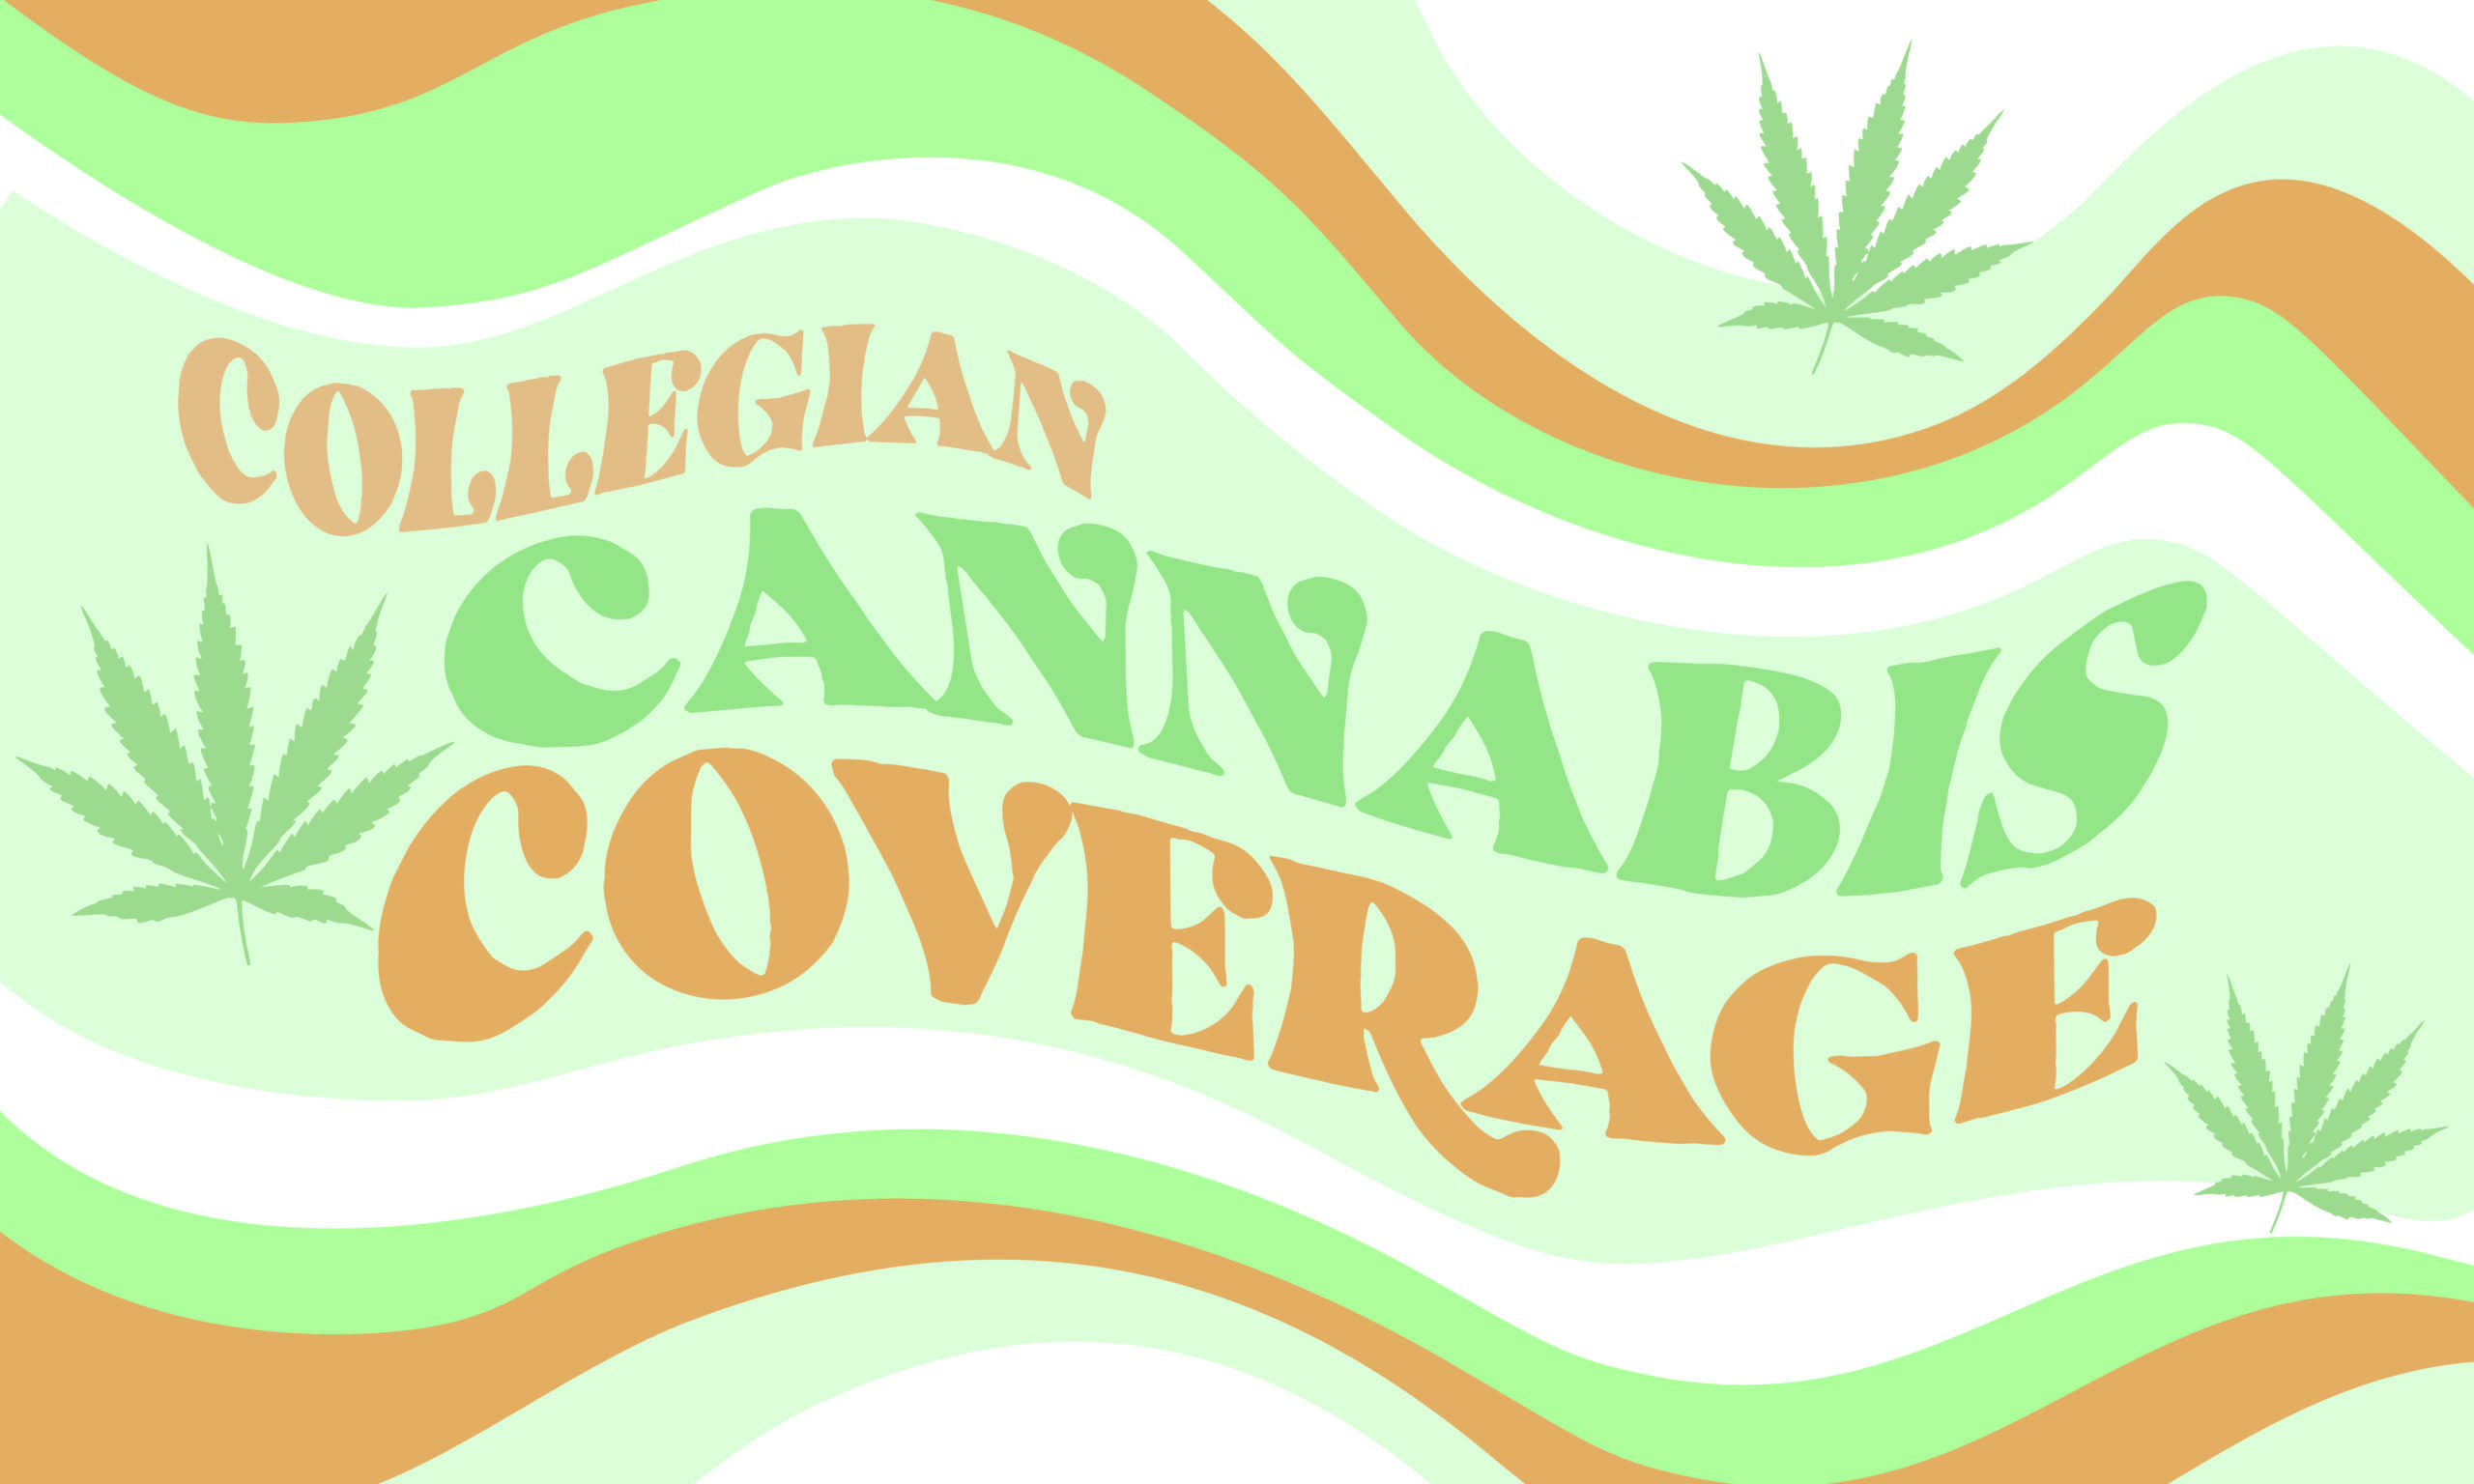 A graphic with funky text and marijuana leaves, used for Collegian Cannabis Coverage.